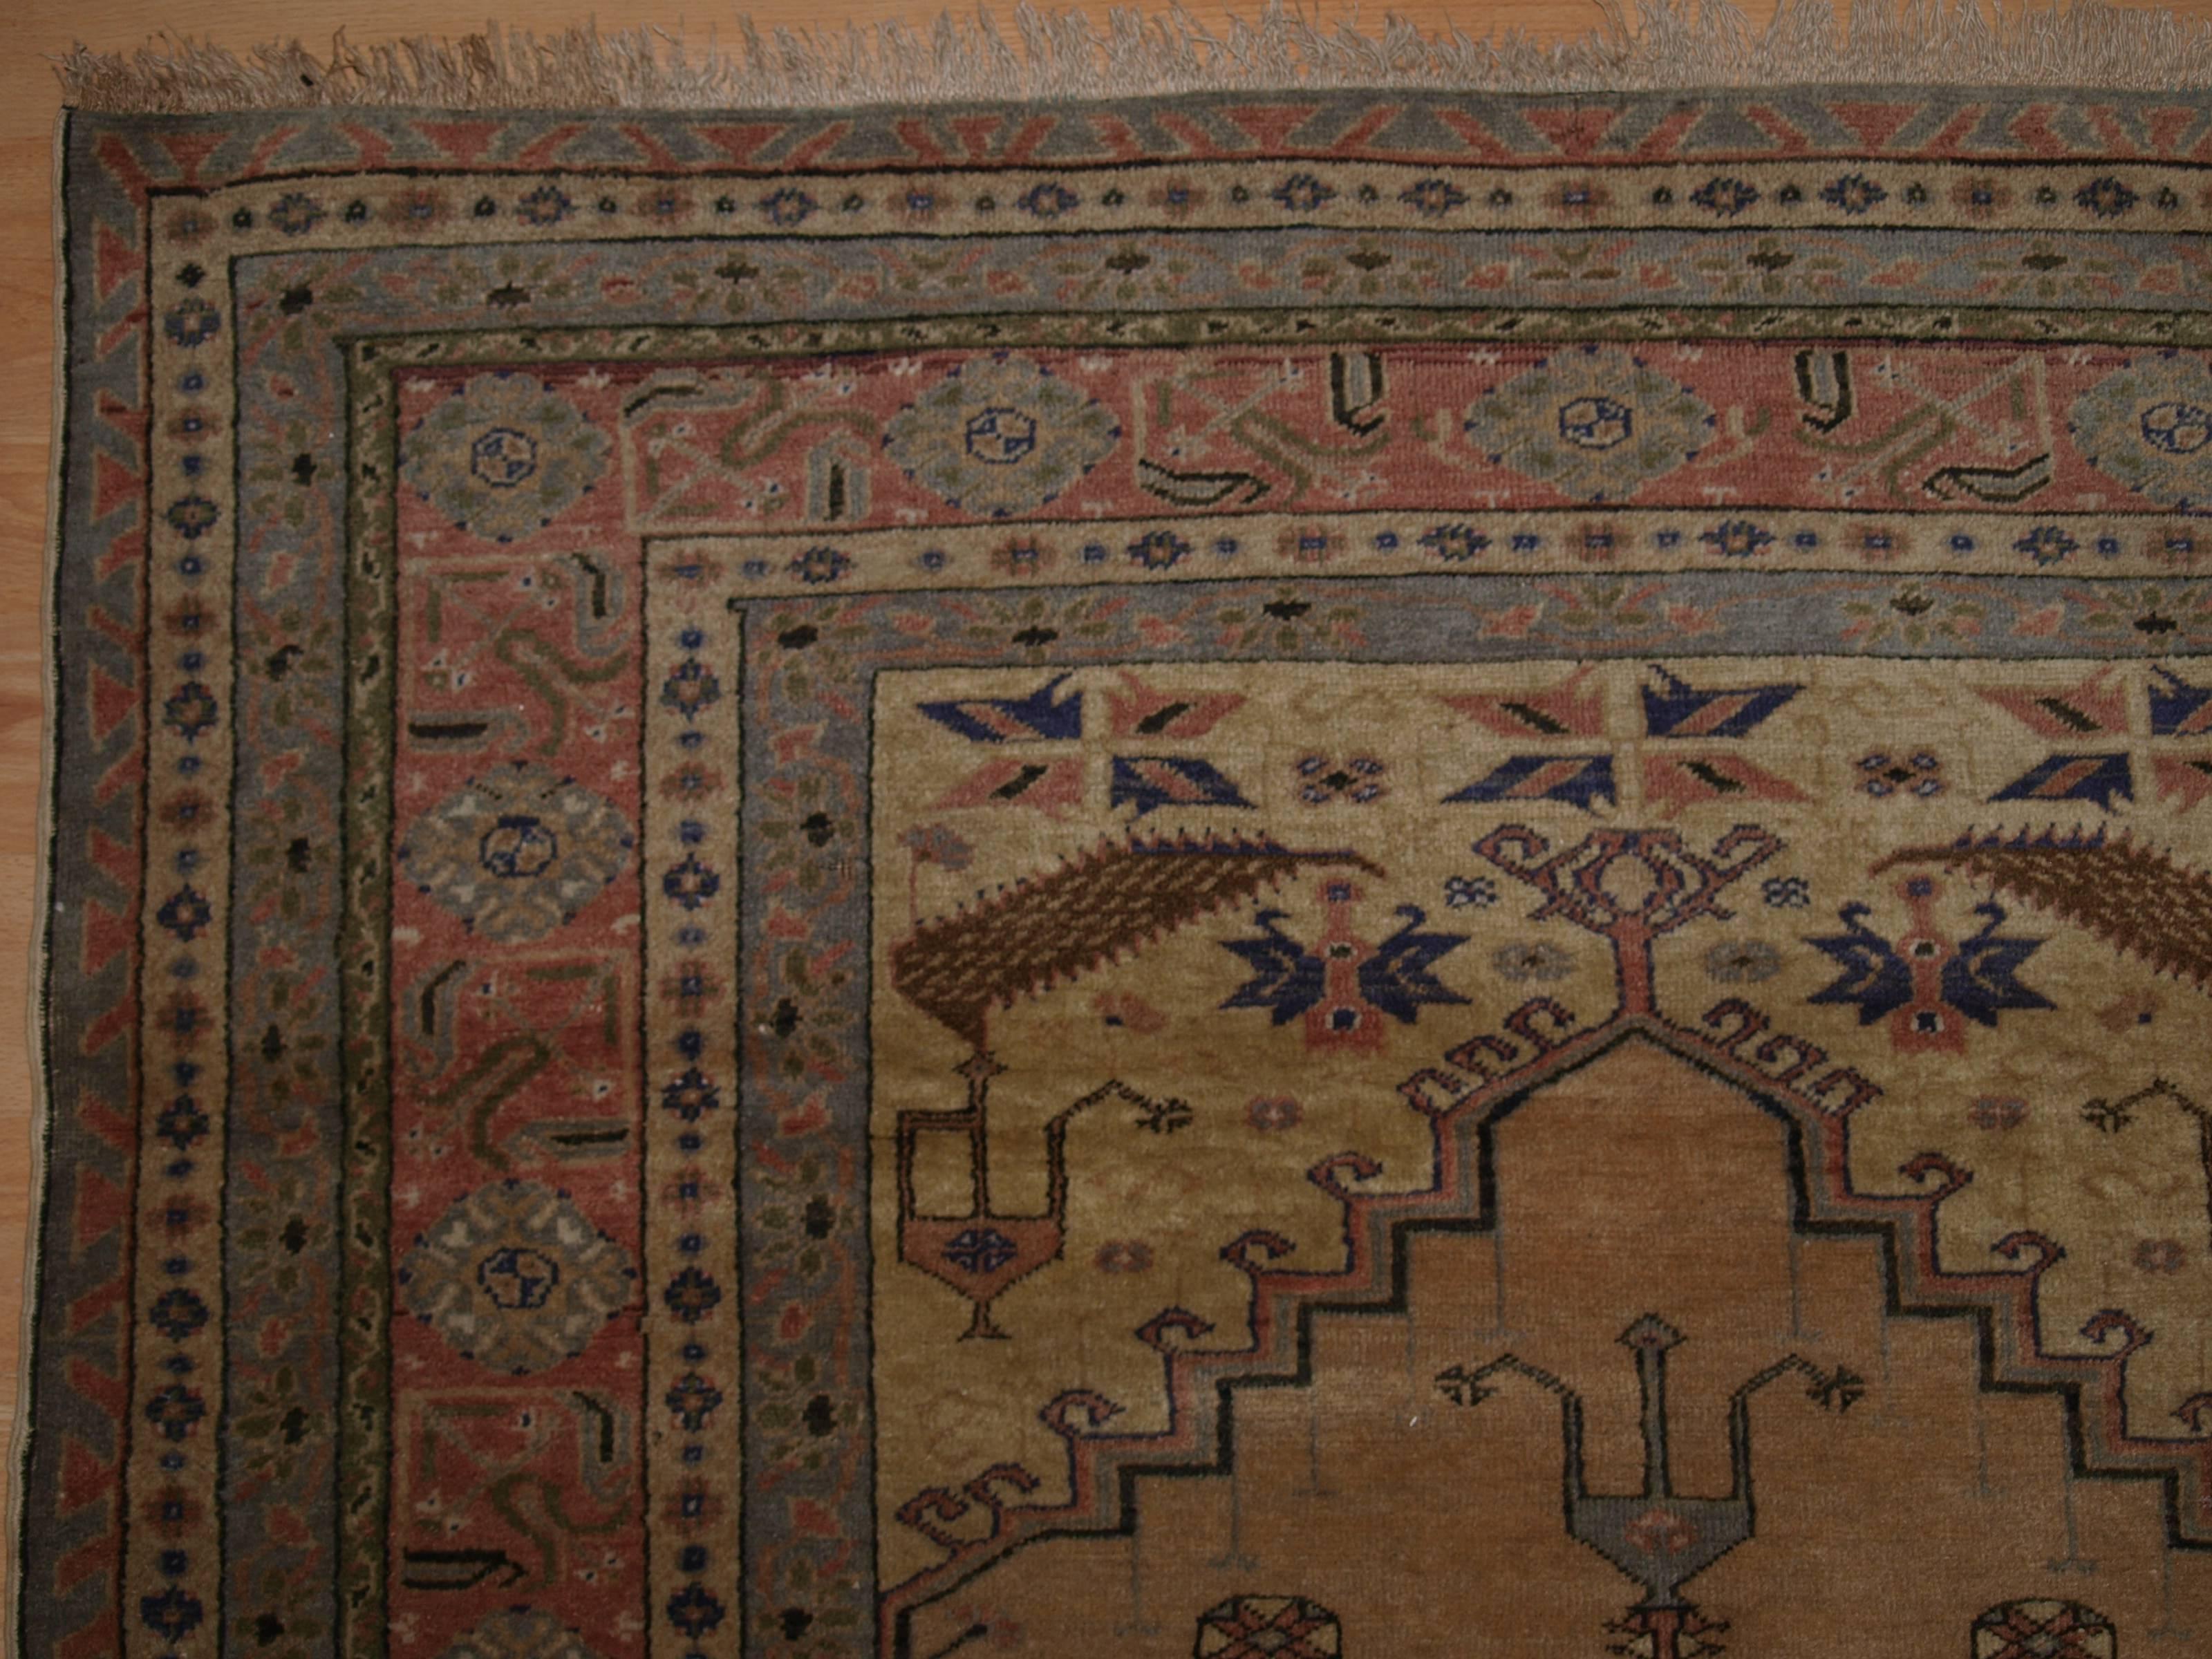 Antique Turkish Kayseri Prayer Rug of Traditional Ladik Design In Excellent Condition For Sale In Moreton-in-Marsh, GB